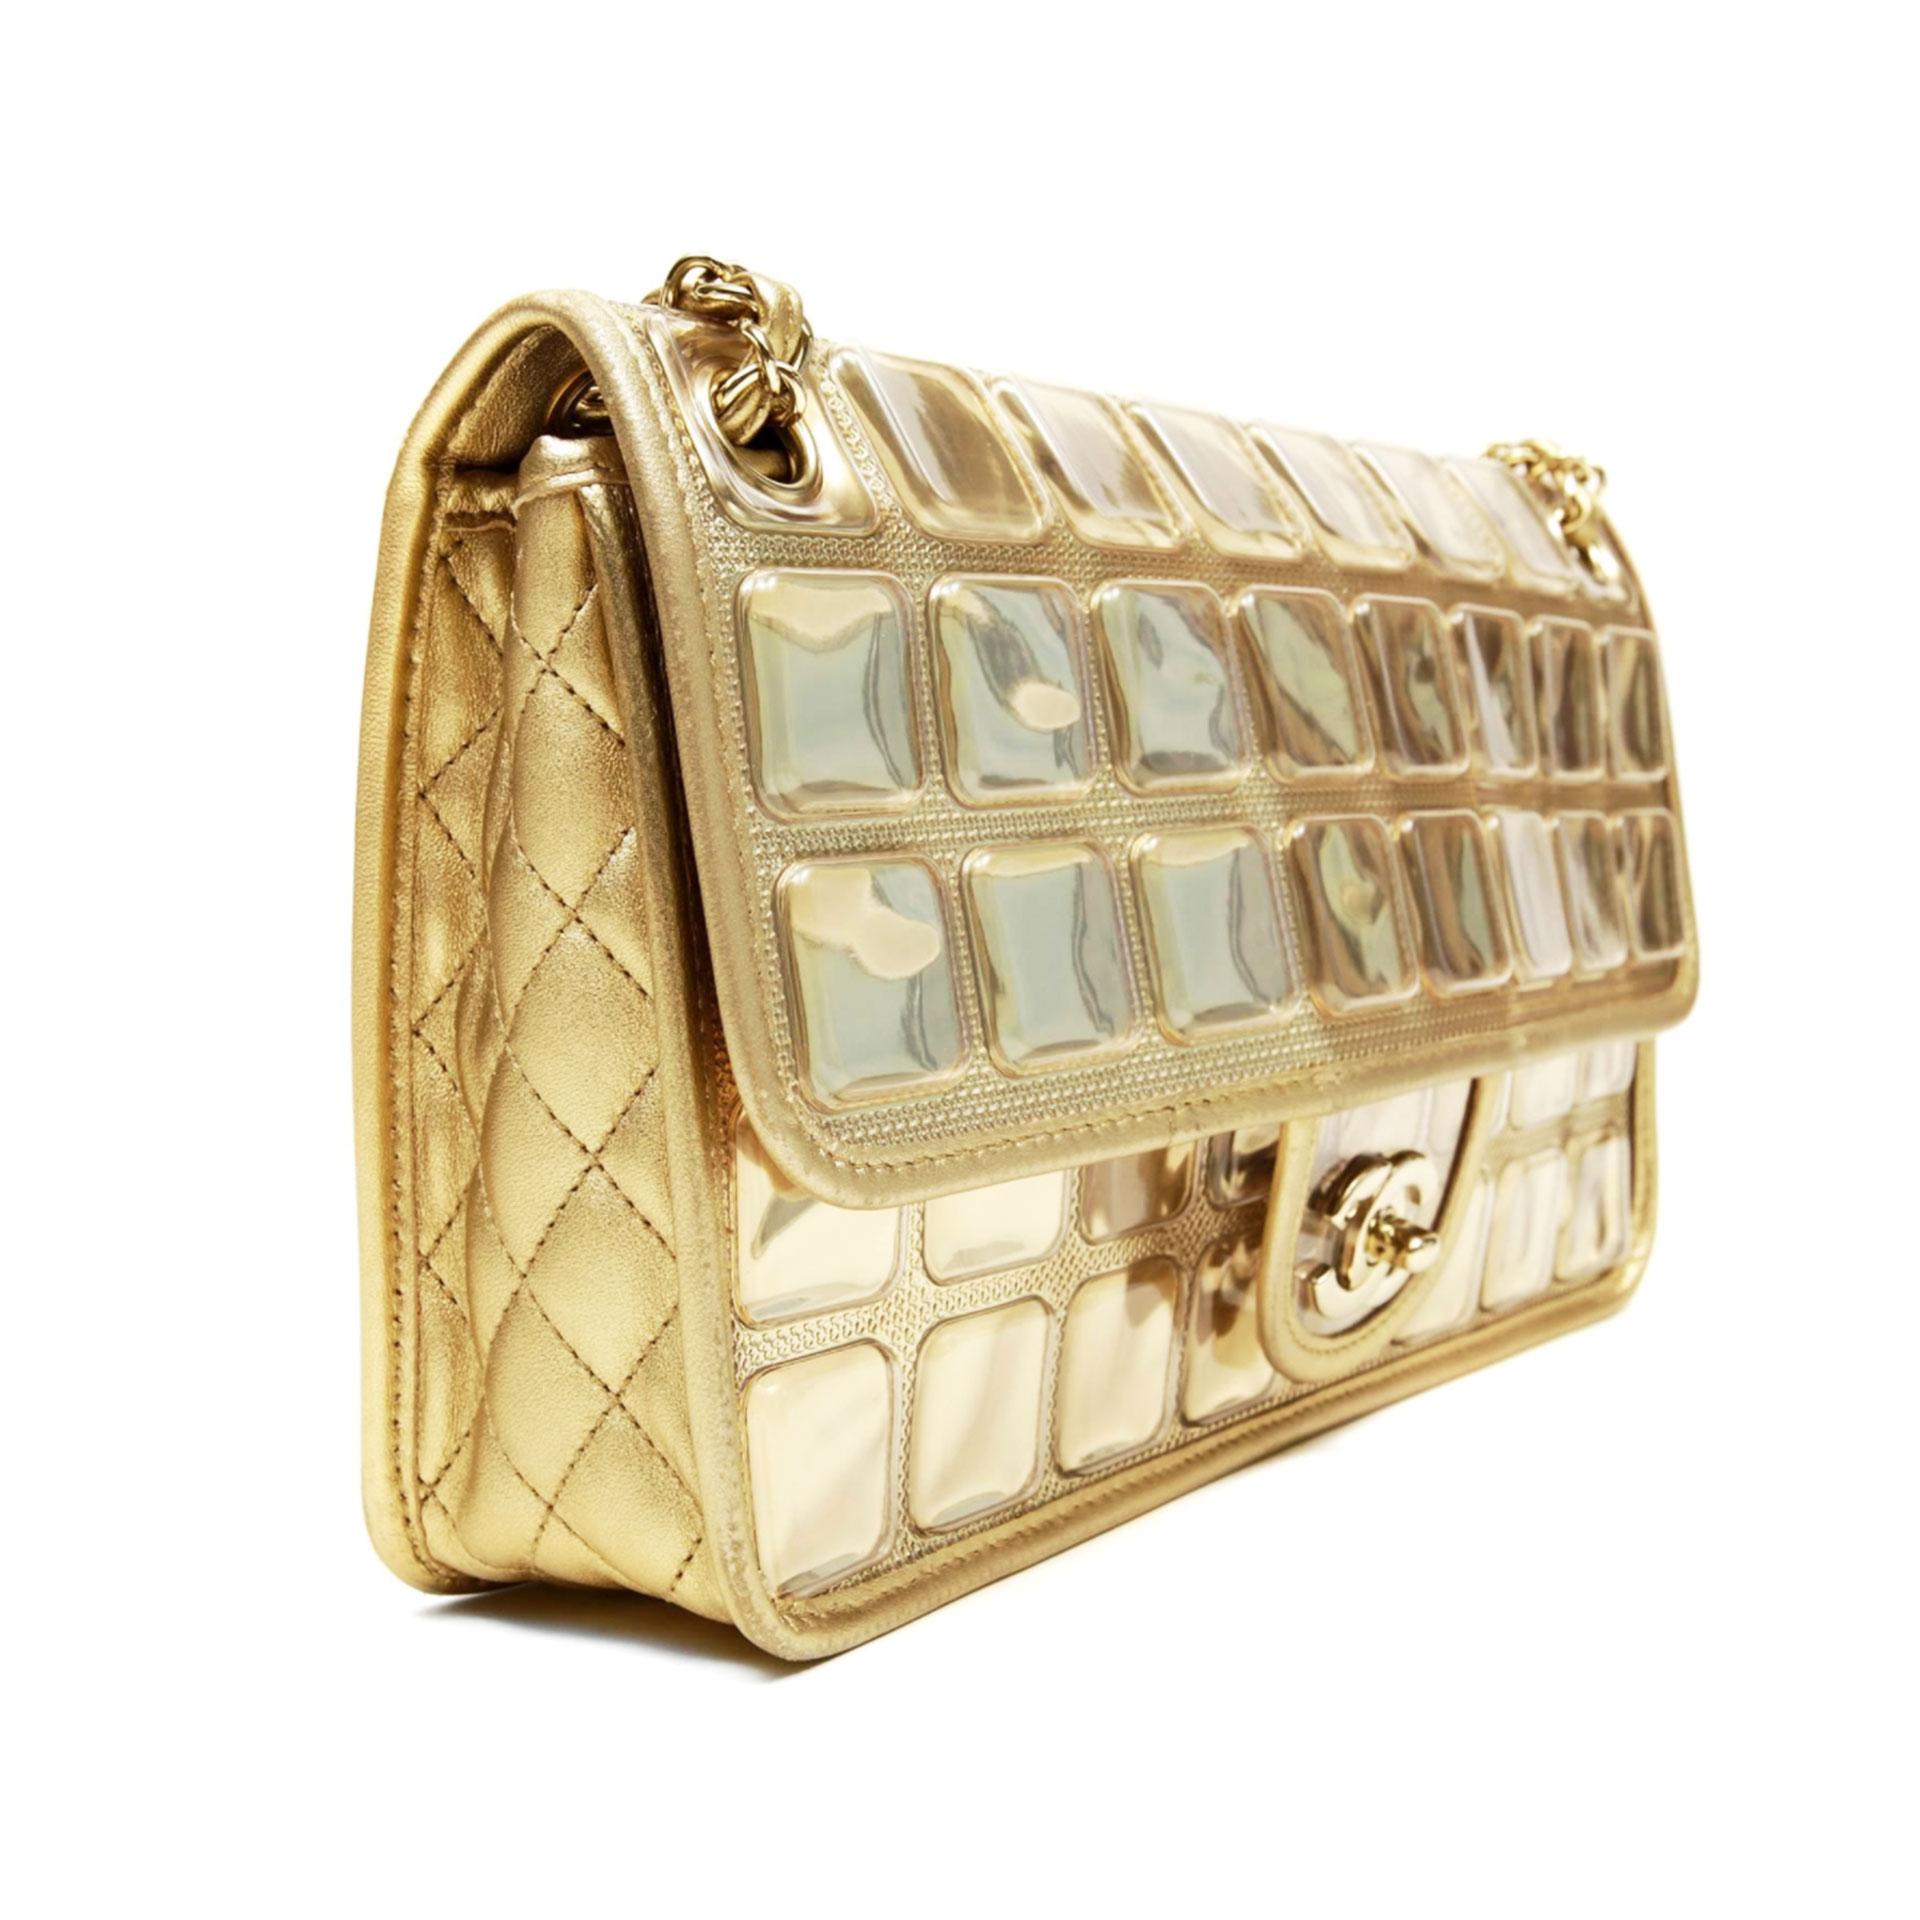 Chanel Limited Edition Ice Cube Flap Metallic Gold Lambskin Leather Shoulder Bag For Sale 4